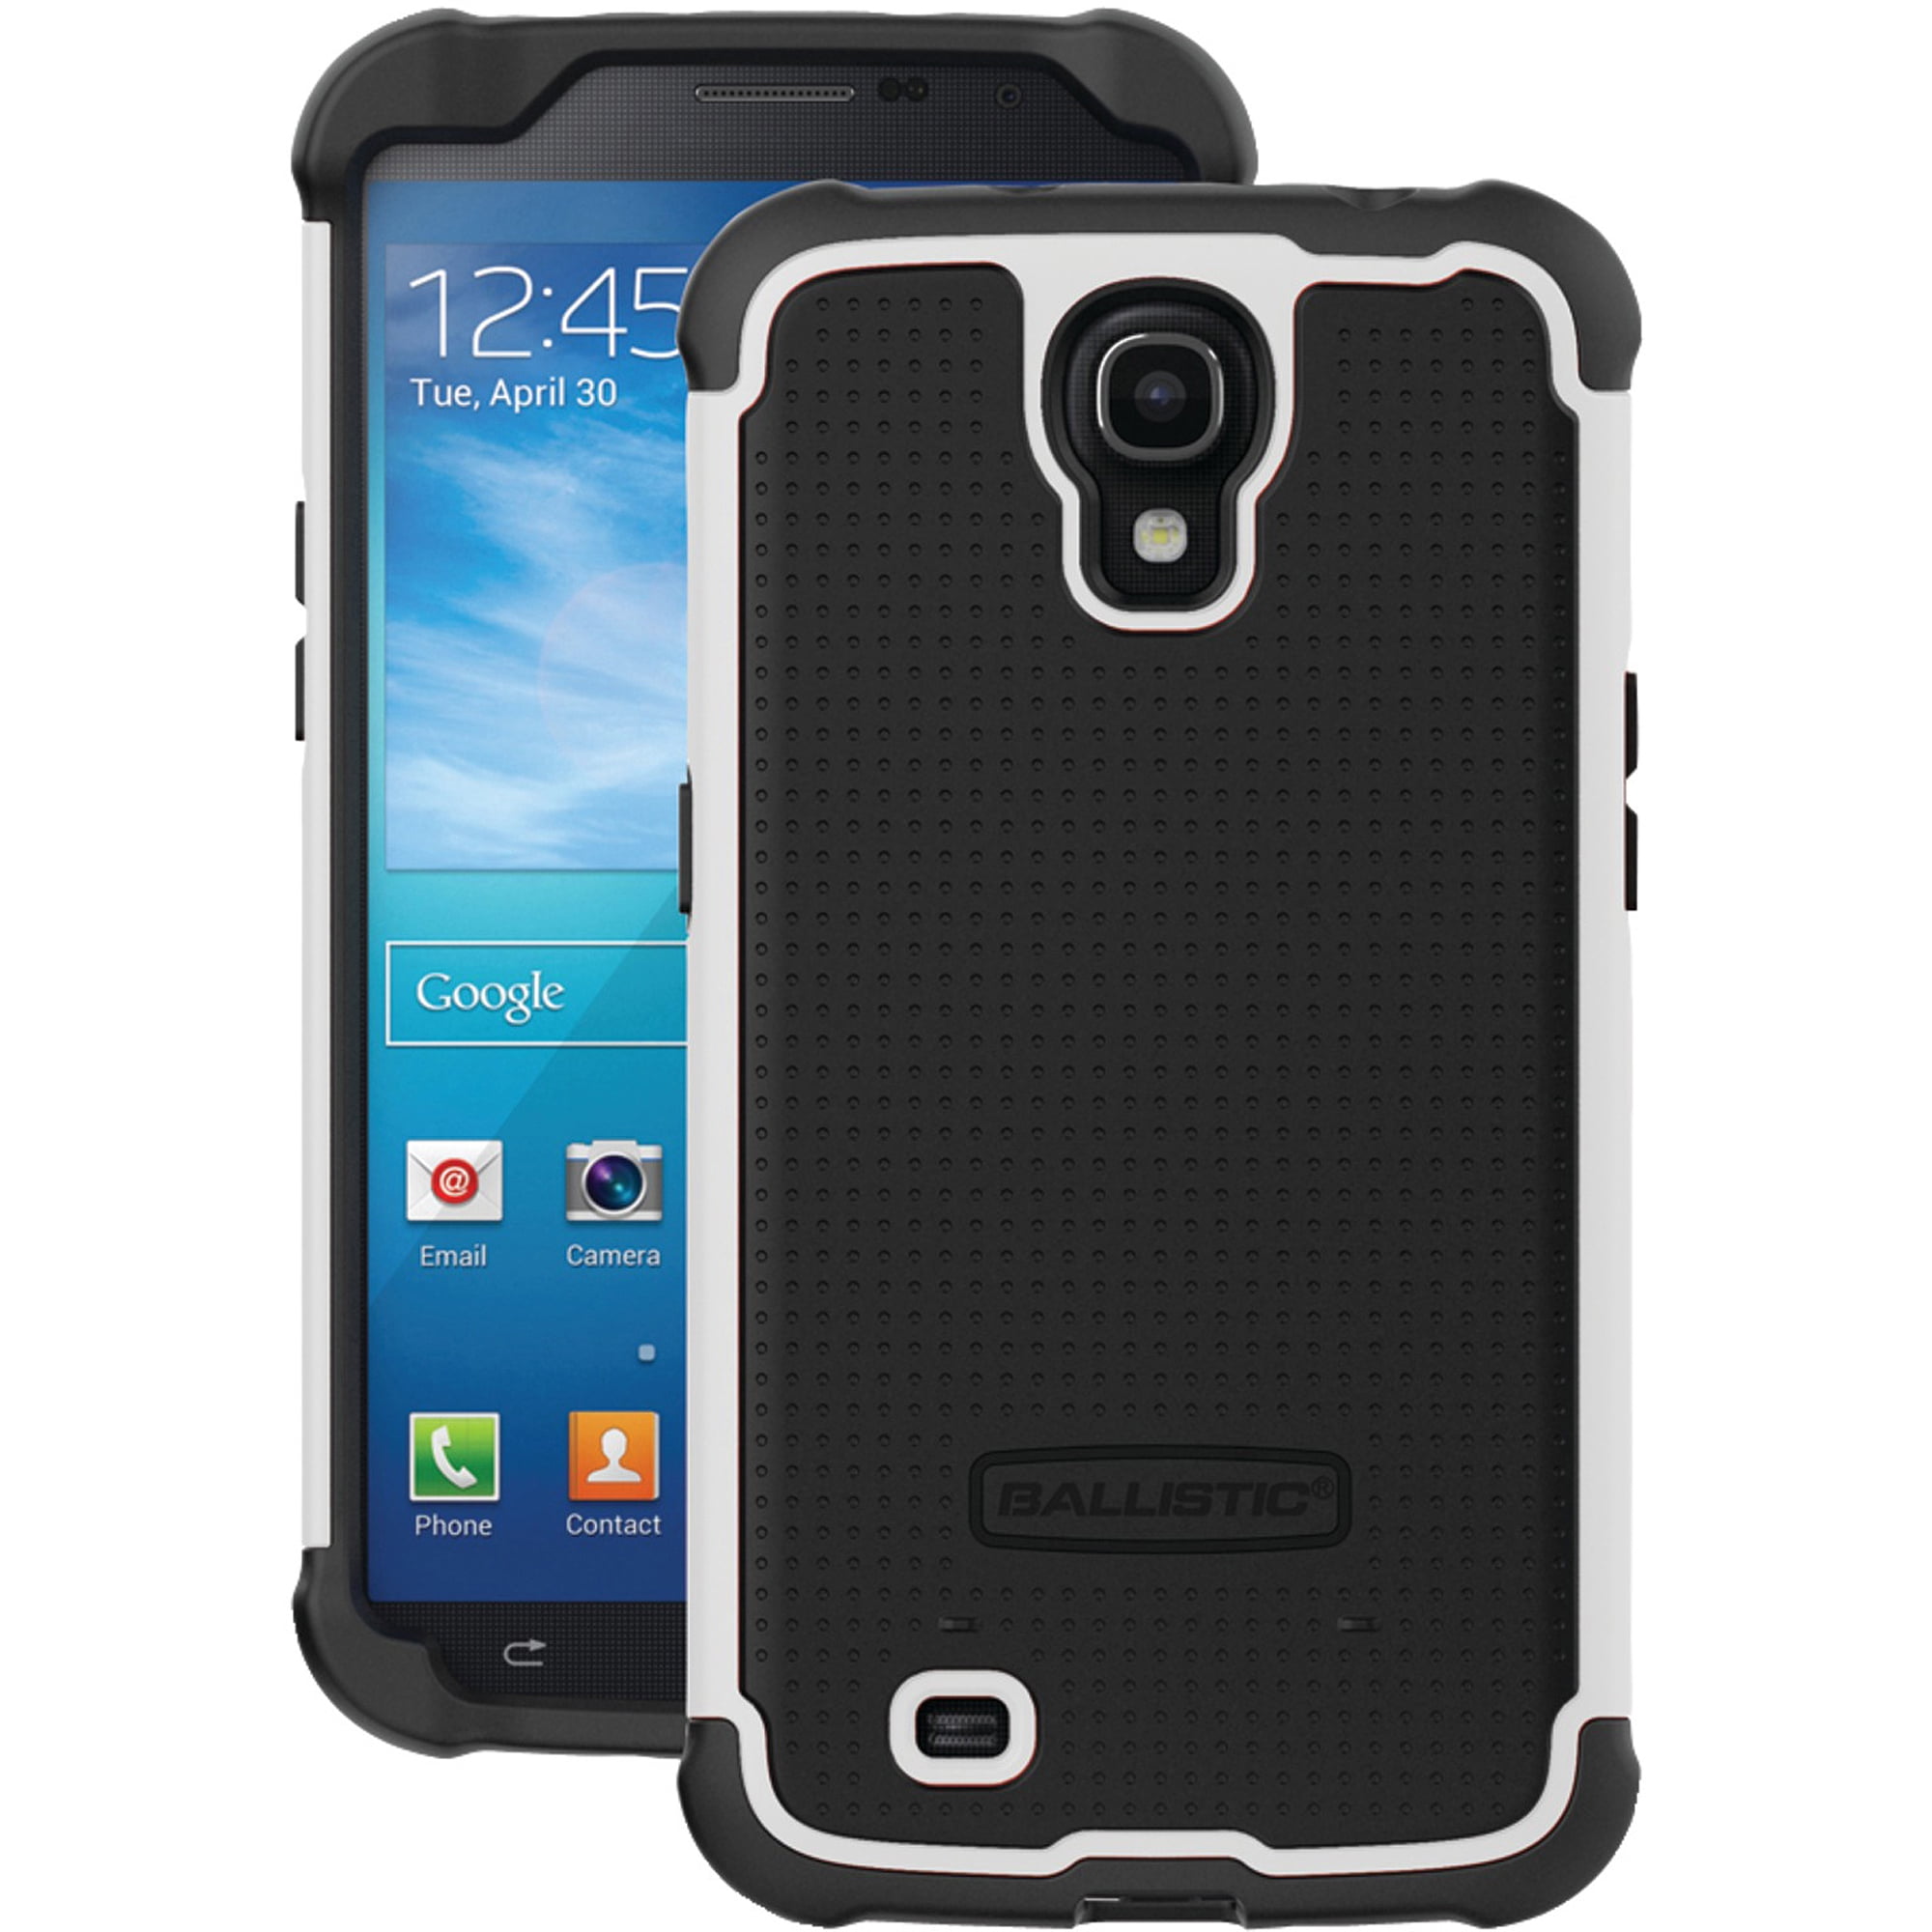 What are some cases that fit the Samsung Galaxy Mega?